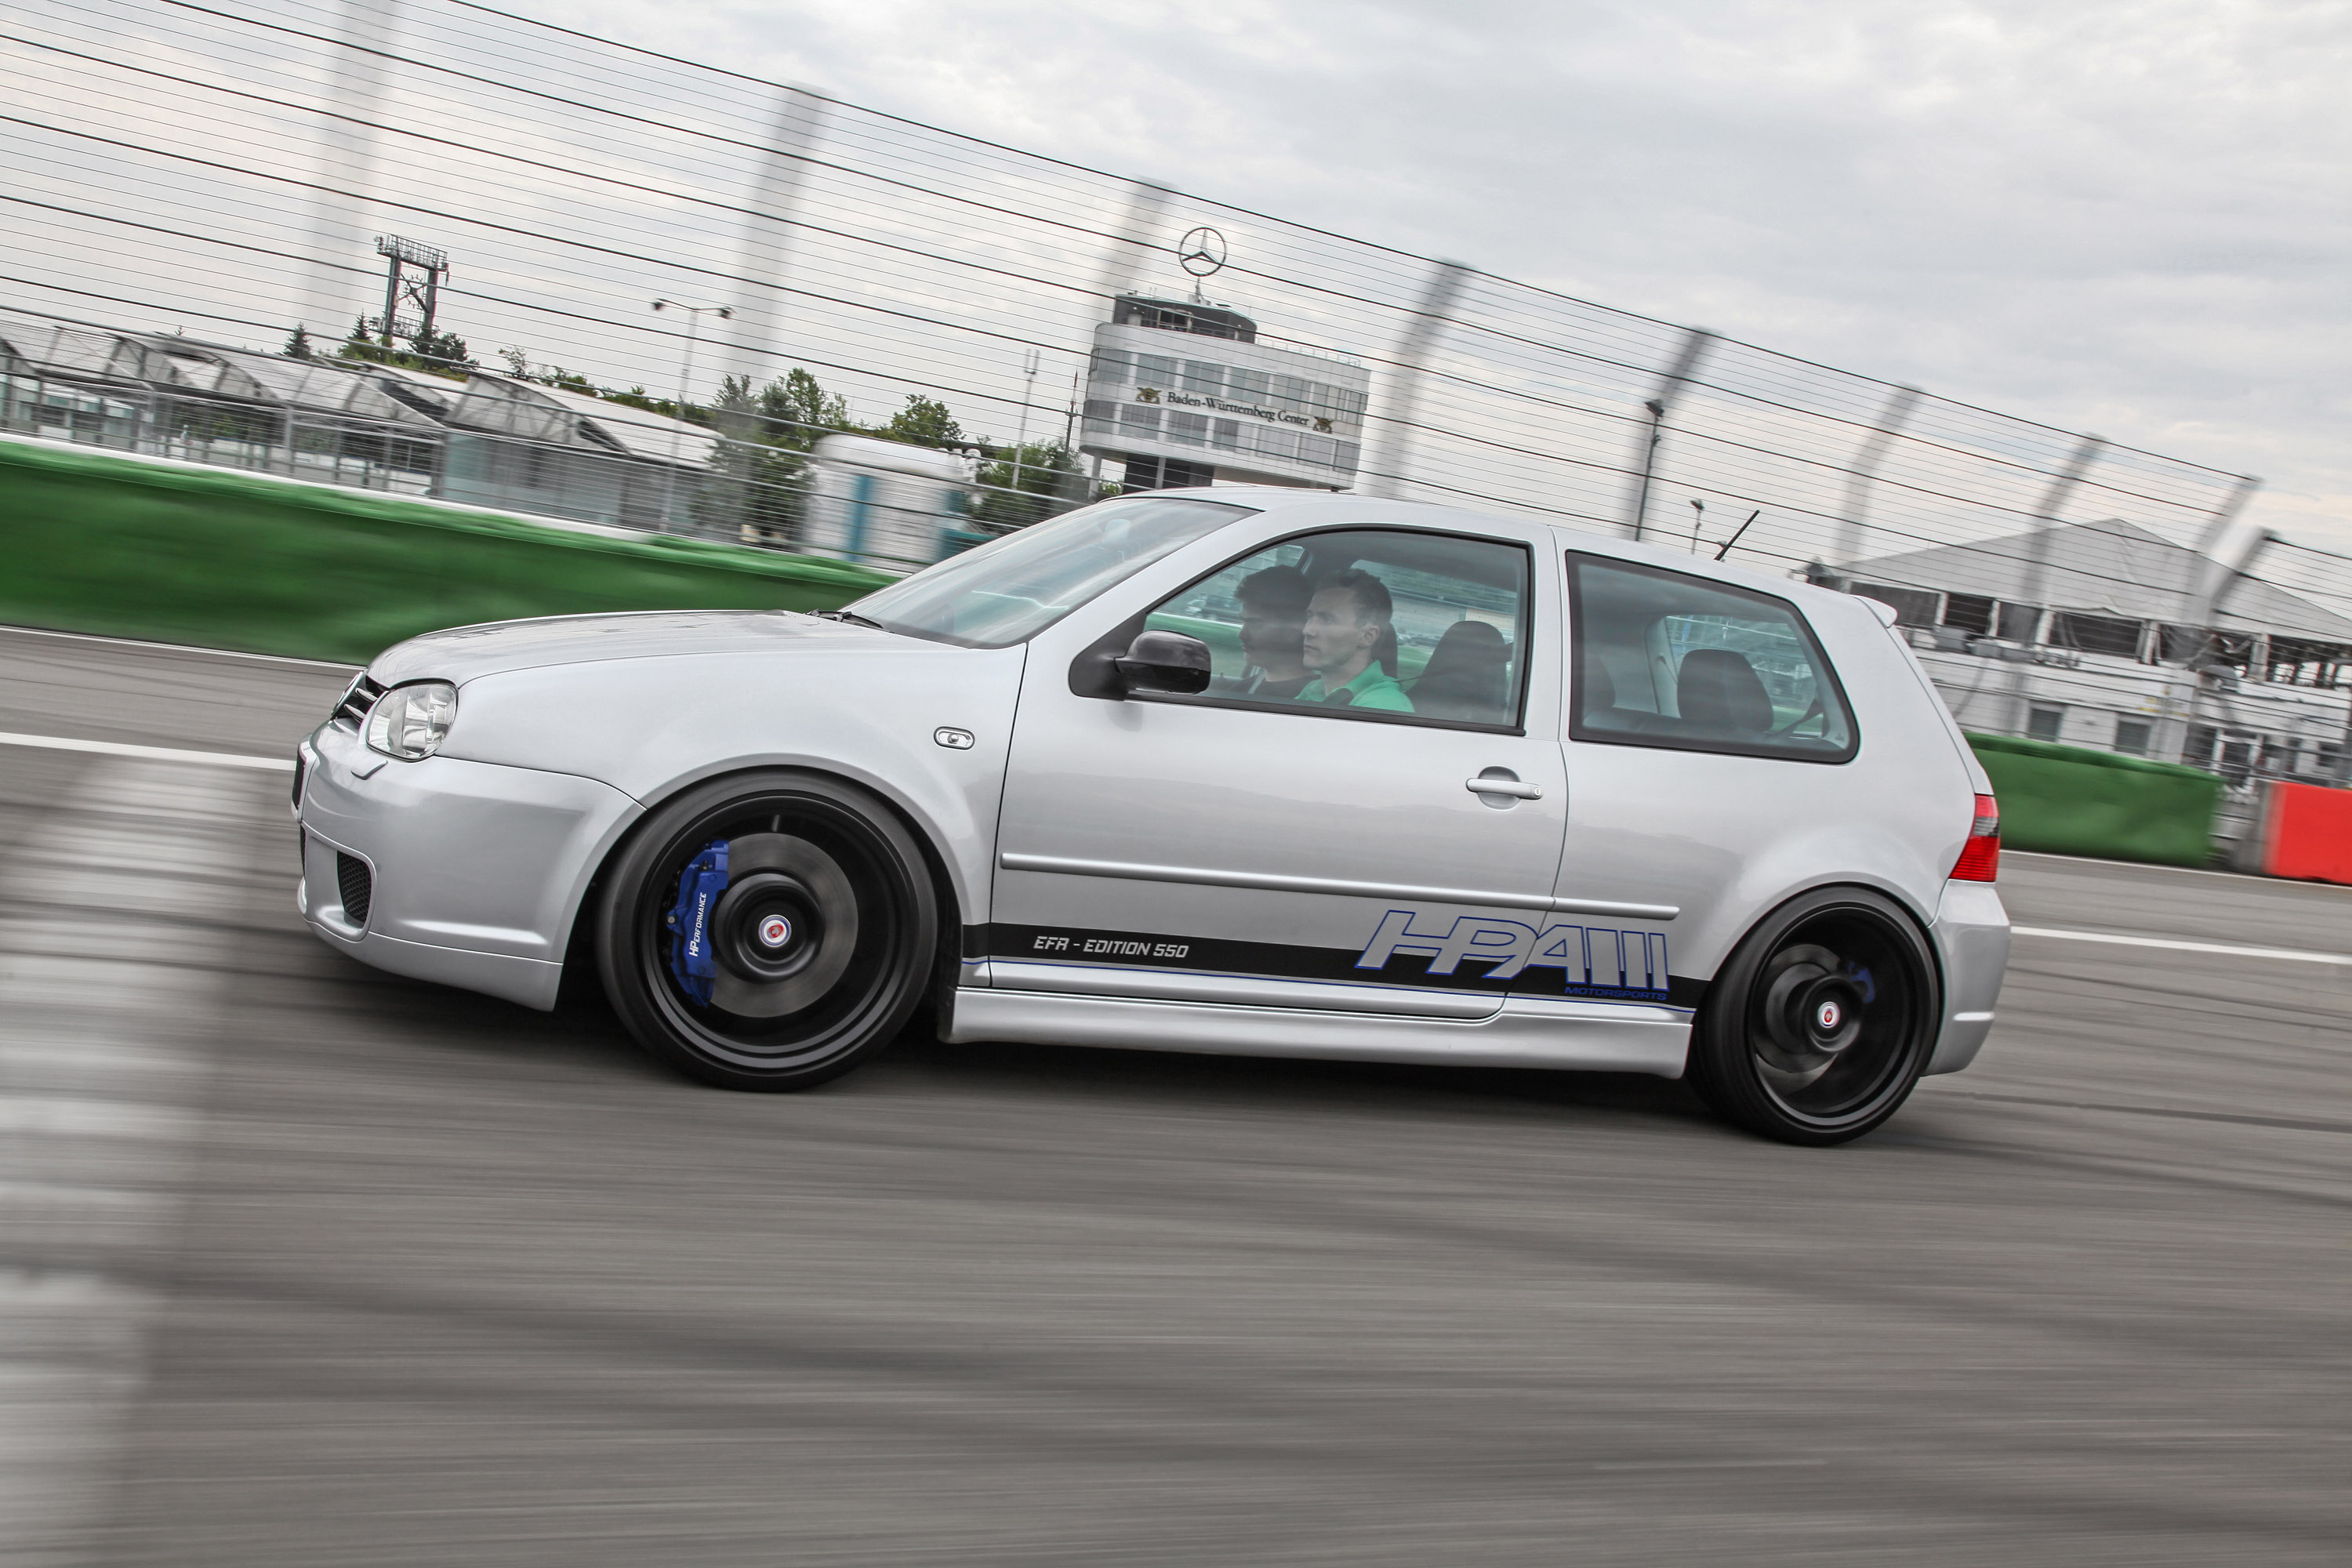 VW Golf IV R32 from tuner HPerformance with 650PS